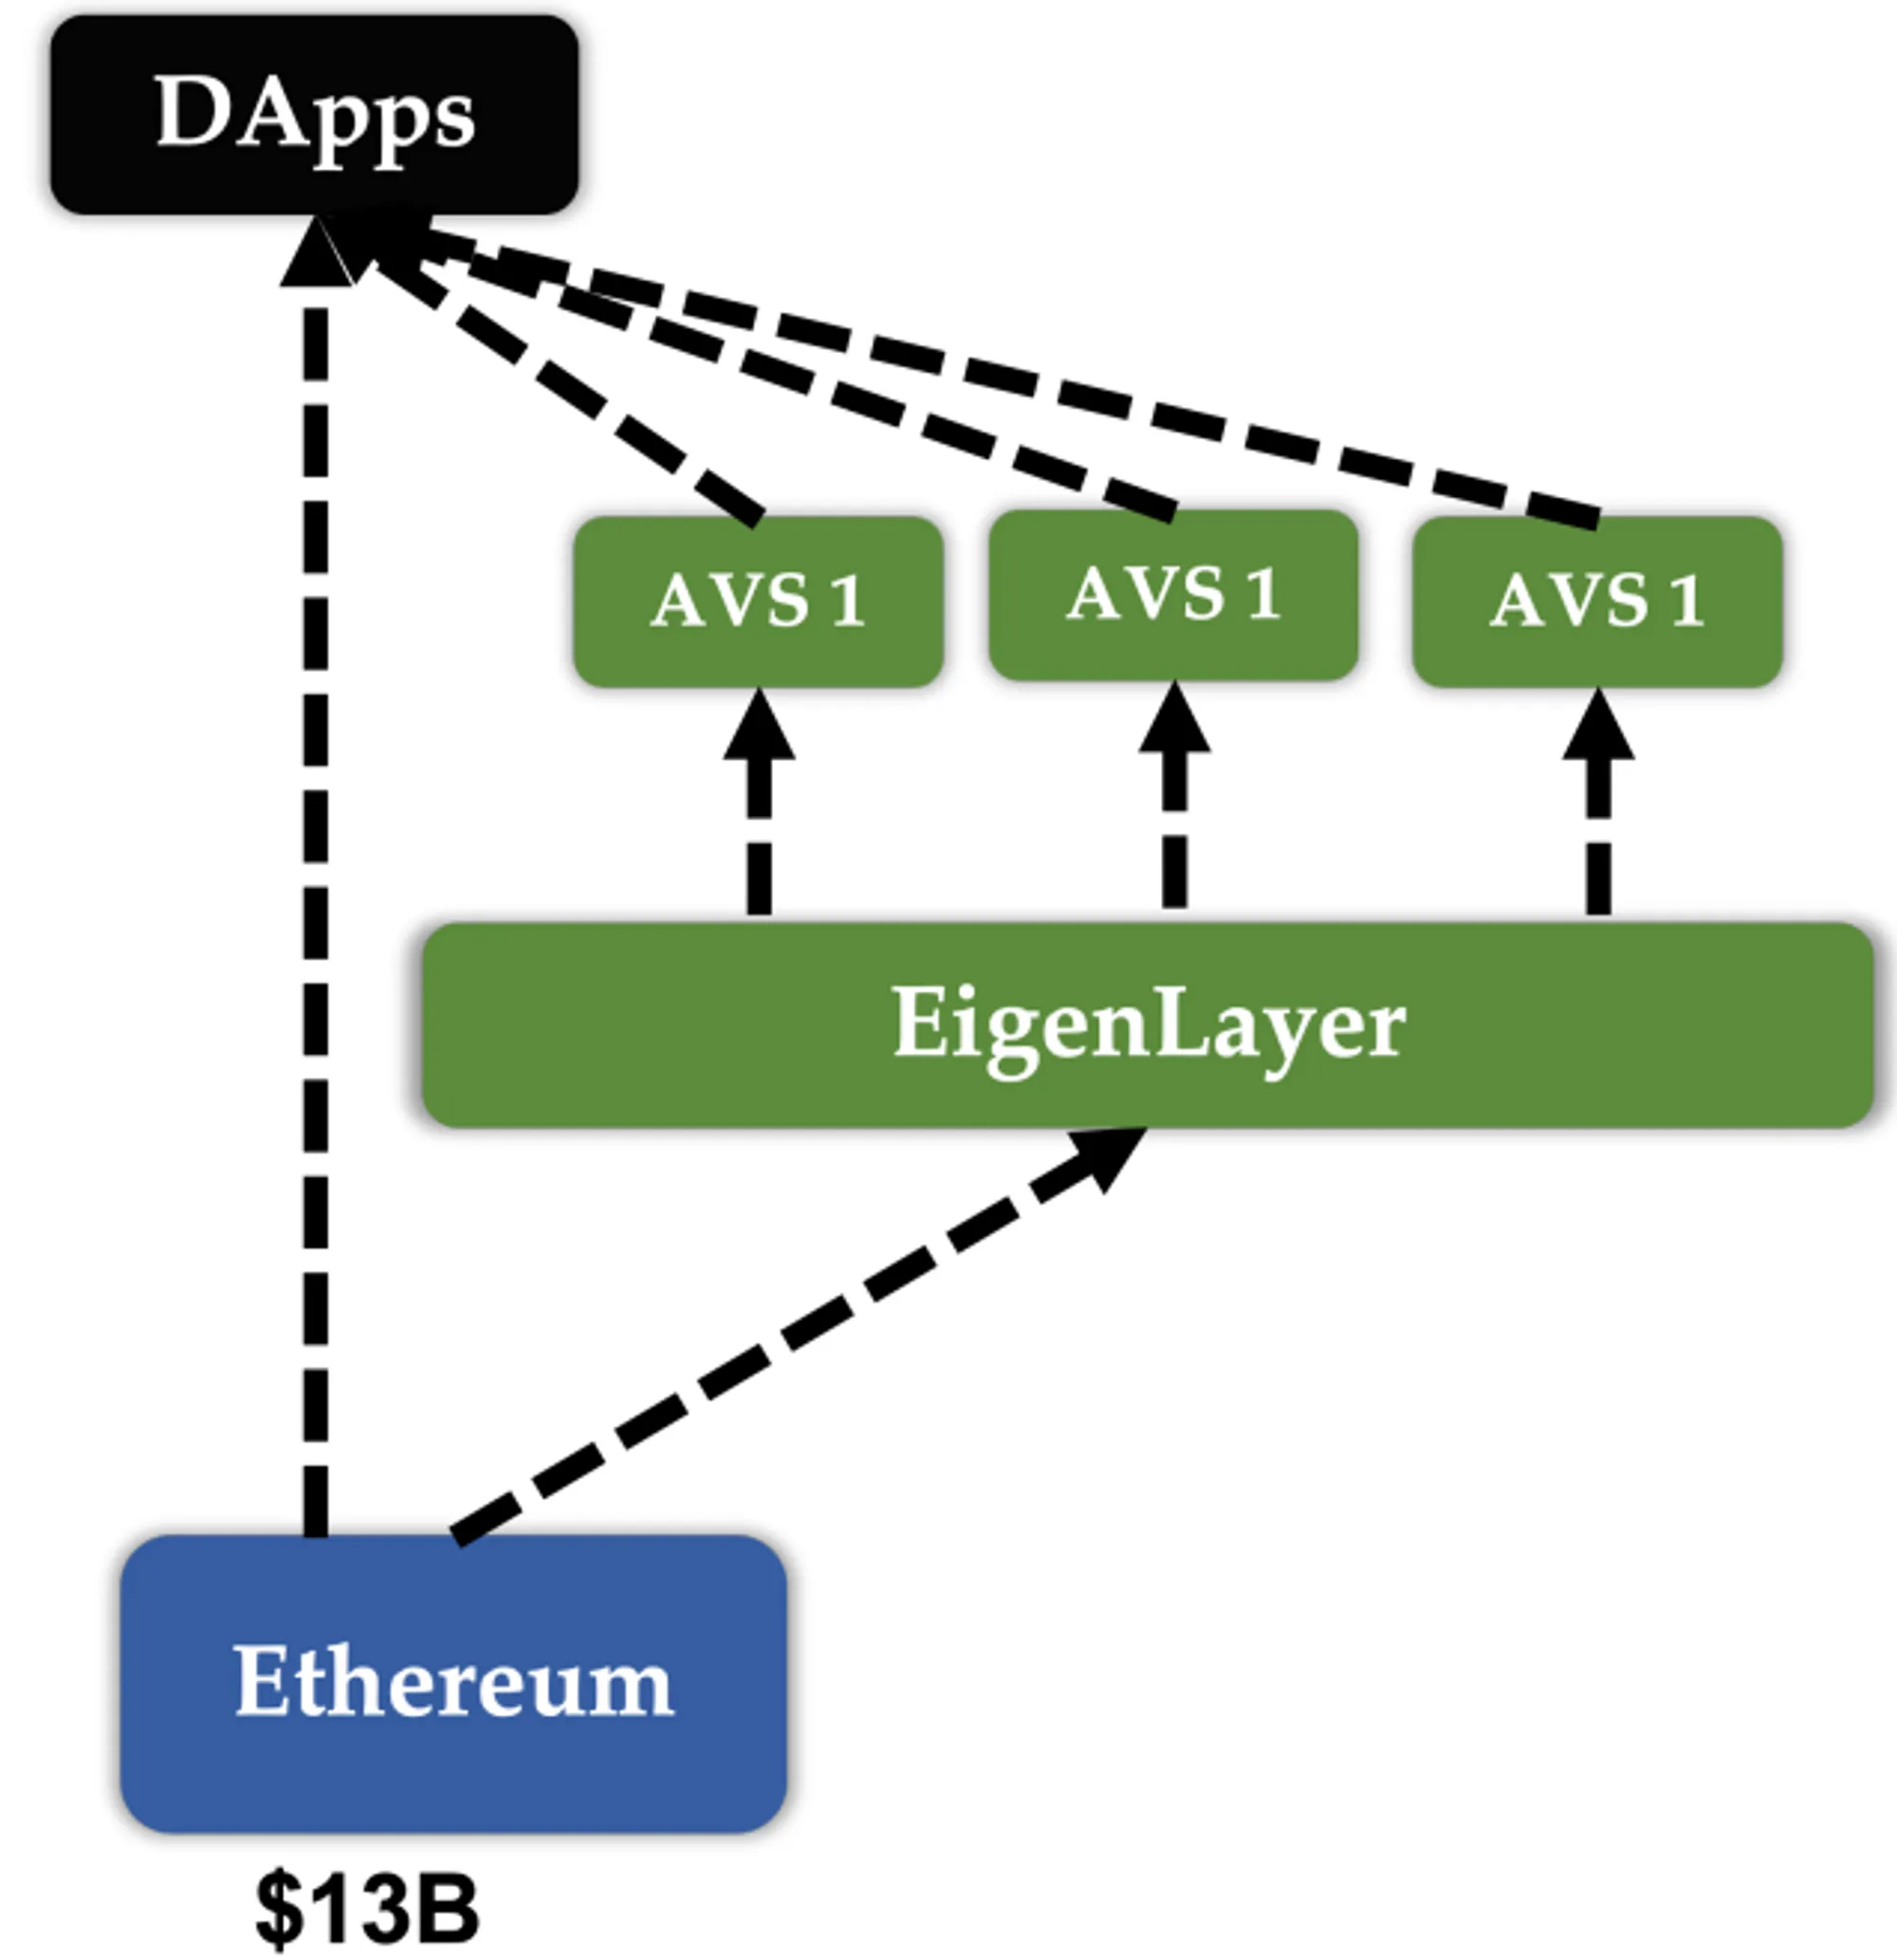 Under the Restaking framework, the funds that were originally scattered across different AVS are now consolidated to collectively provide security and trust for these AVS and Ethereum. (https://docs.eigenlayer.xyz/whitepaper.pdf)